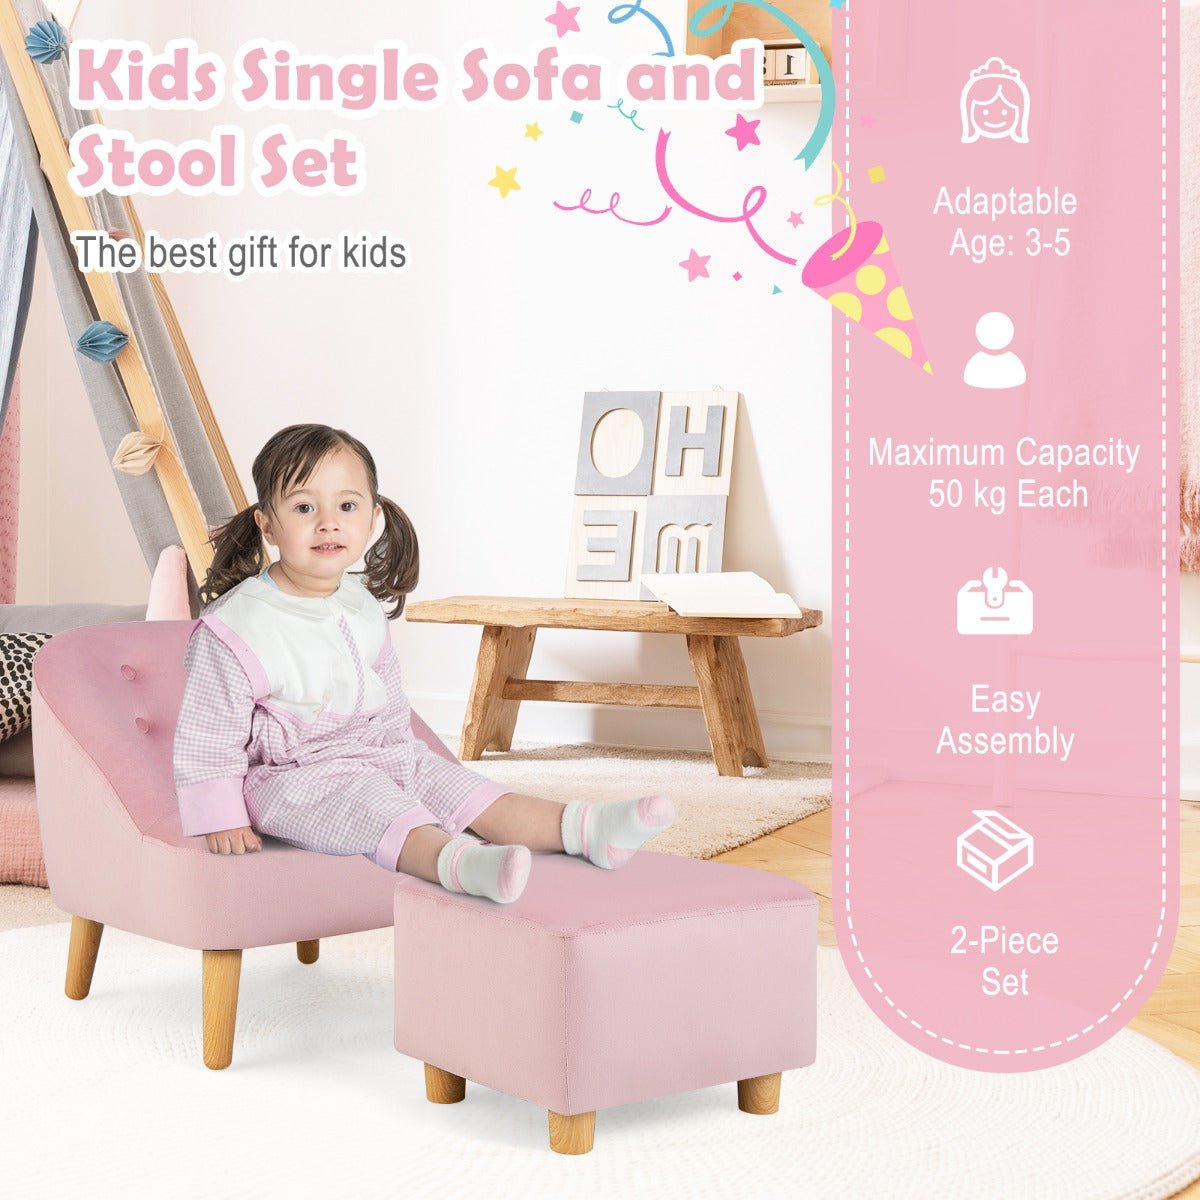 Kids Single Sofa Chair & Stool - Pink, Ages 3-5, Cozy Set